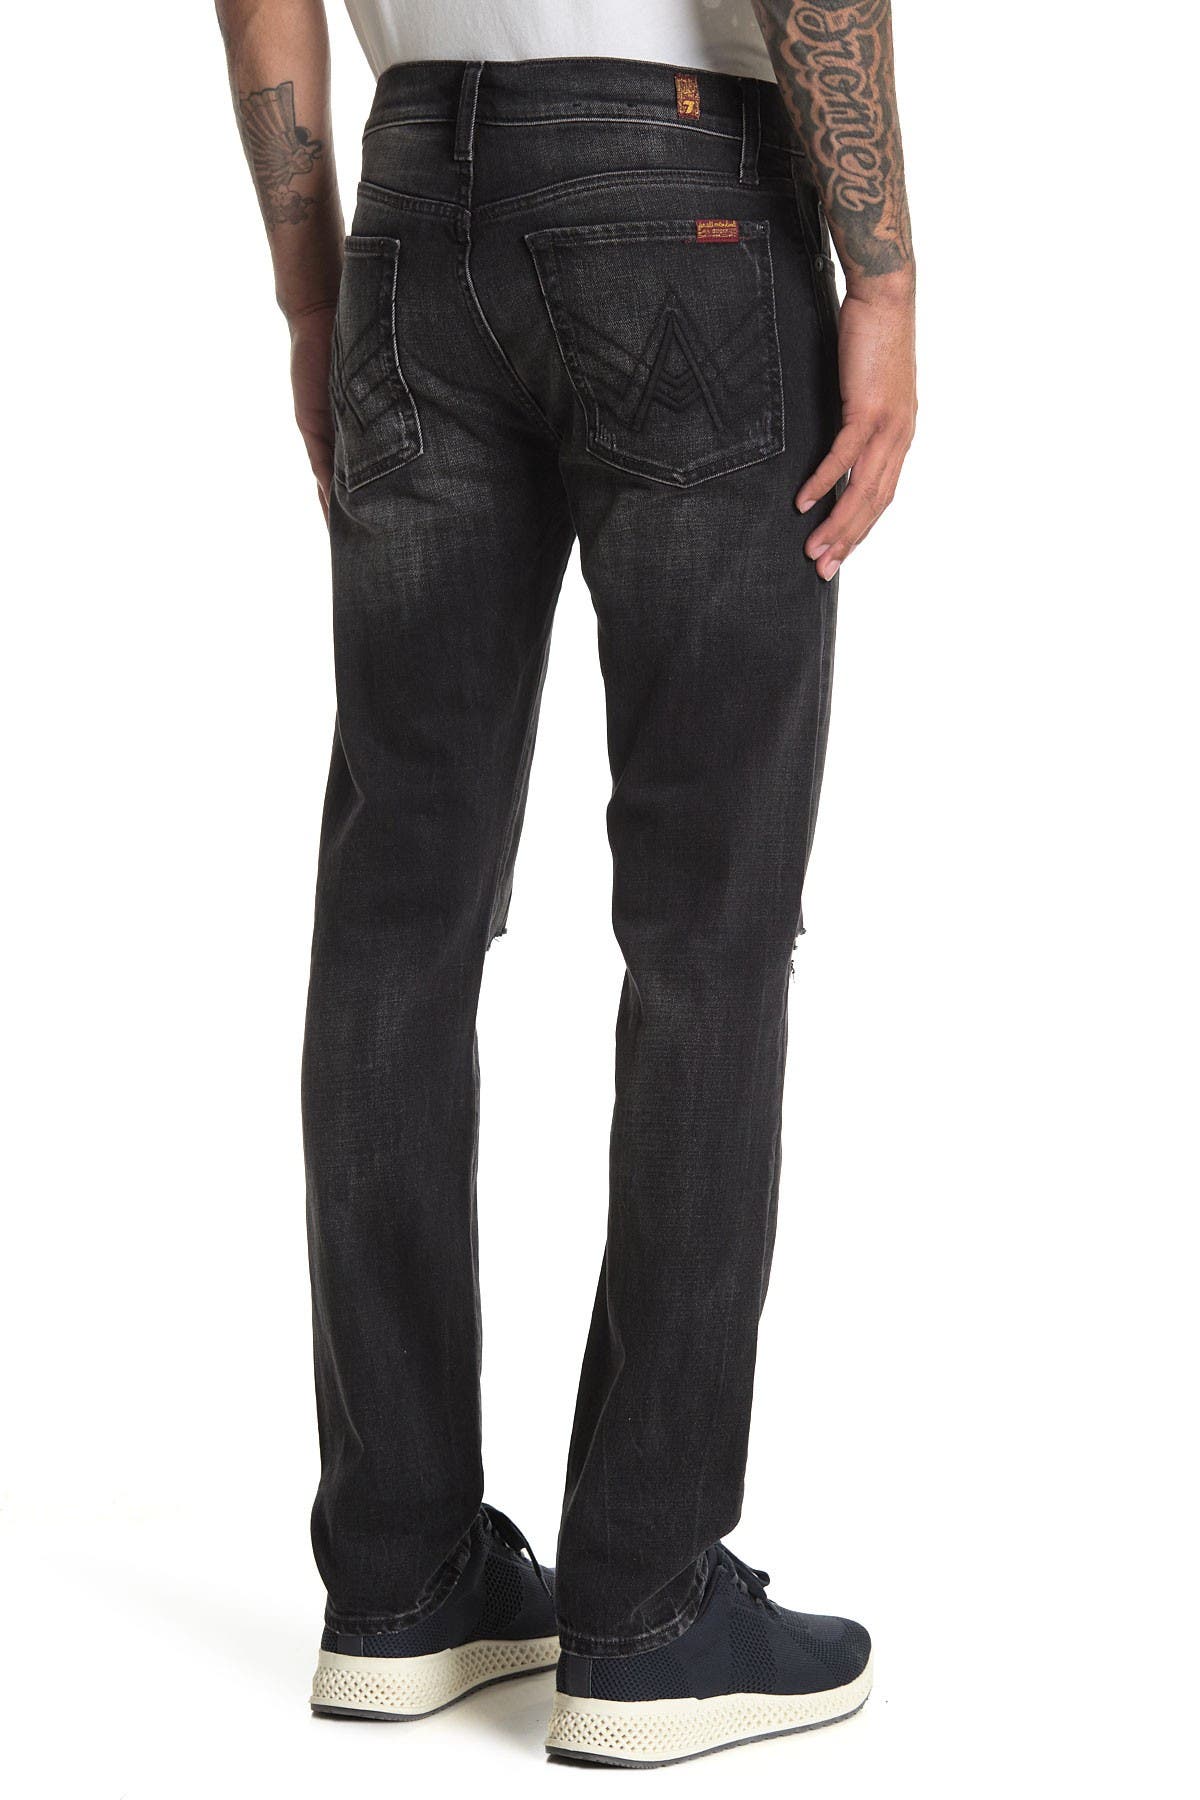 7 For All Mankind Paxtyn Distressed Skinny Jeans In Oxford2